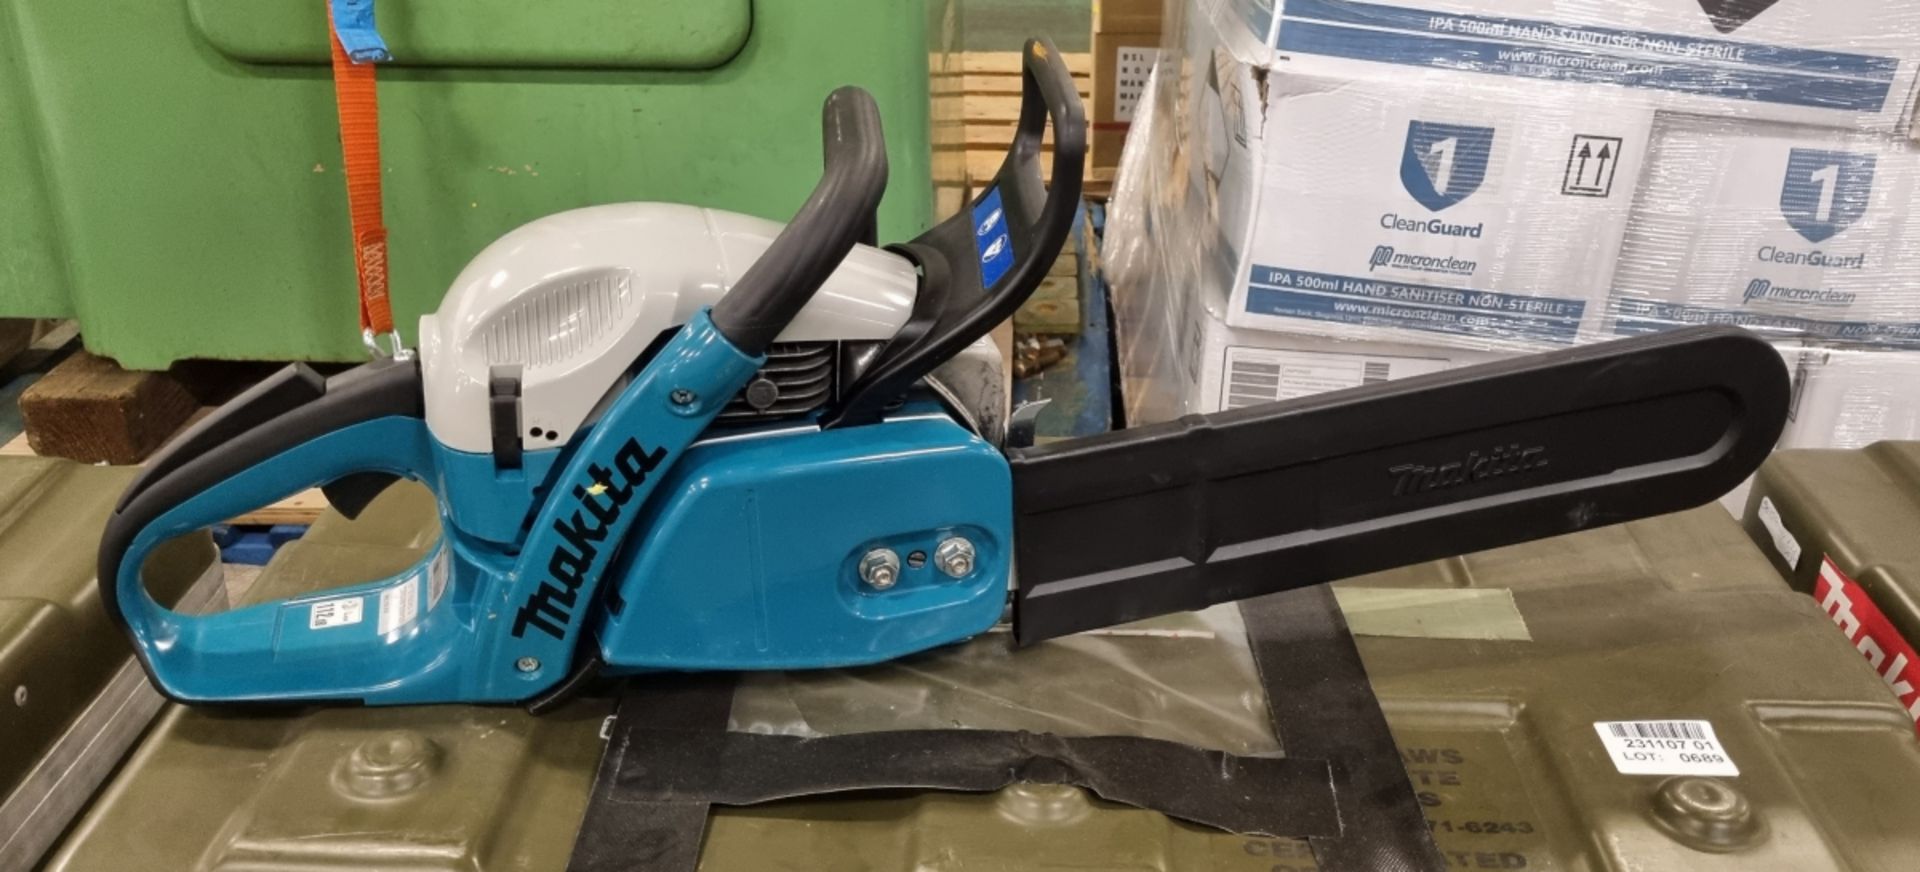 Makita DCS5000 chainsaw in green case with maintenance tools - L 800 x W 450 x H 320mm - Bild 7 aus 8